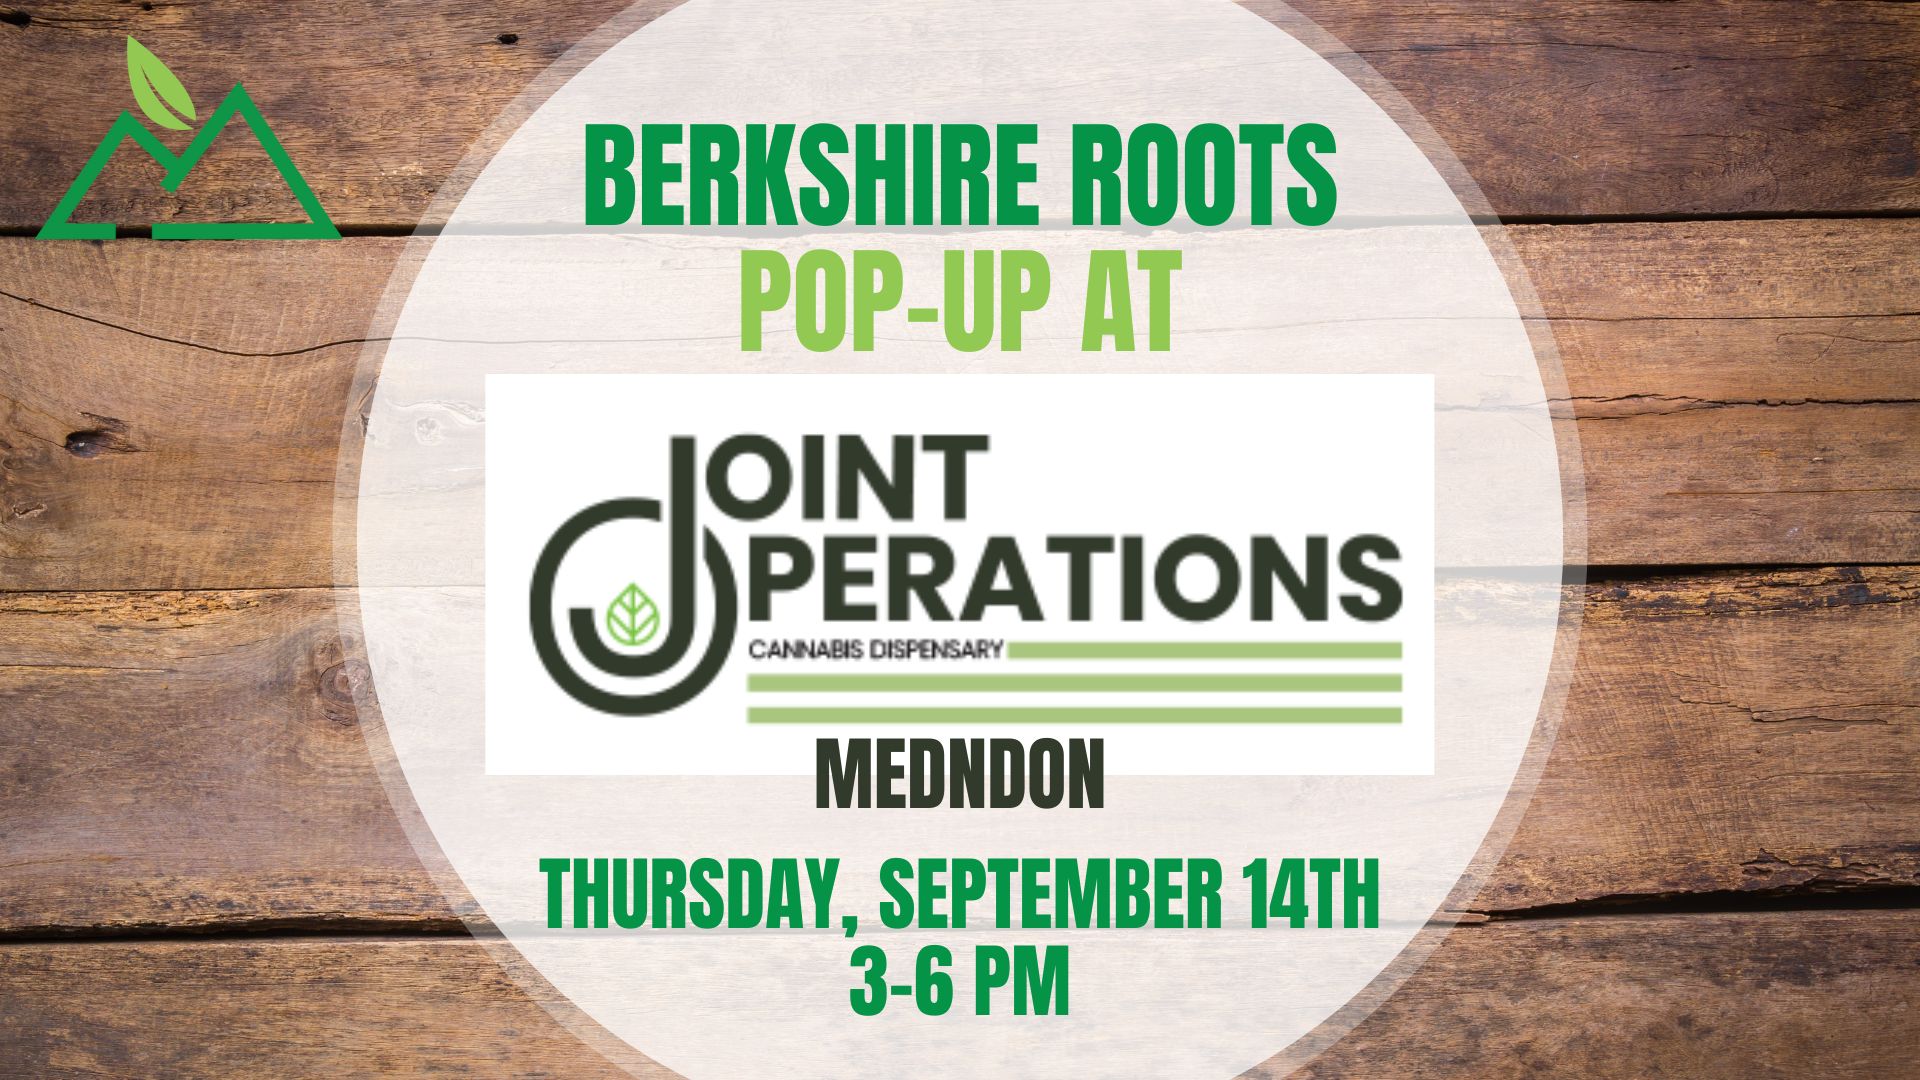 Berkshire Roots Pop Up at Joint Operations in Mendon